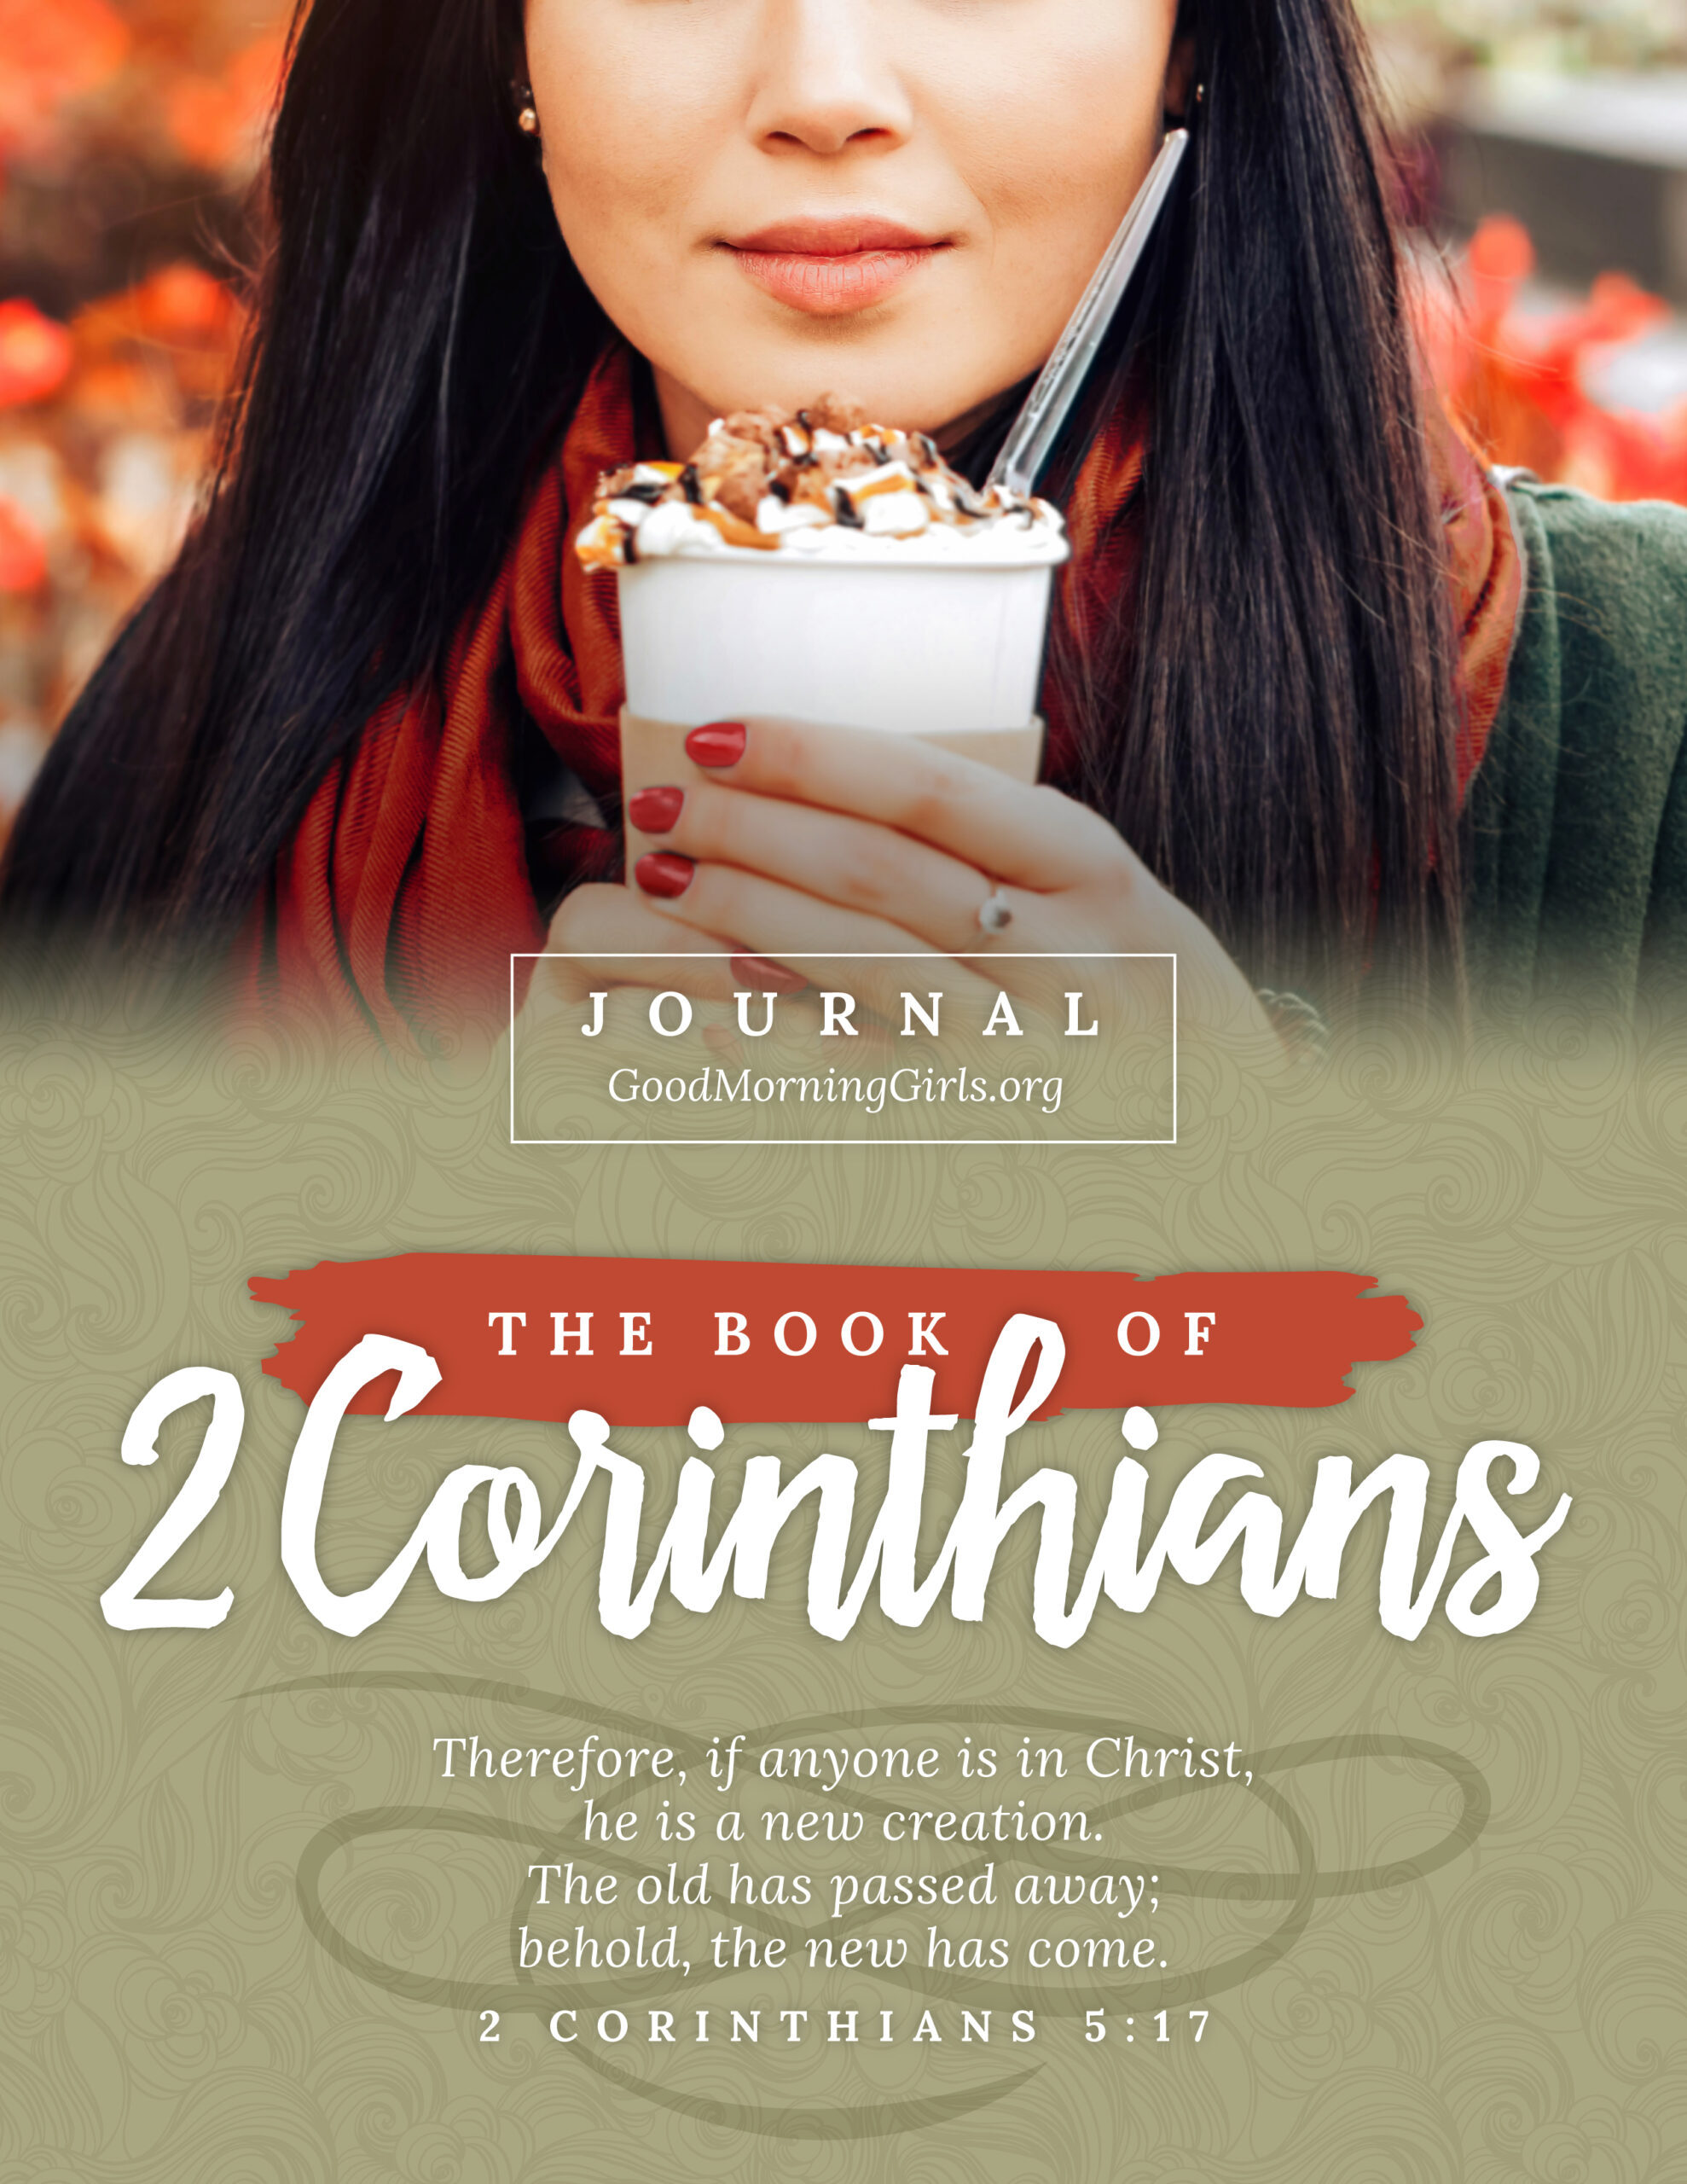 Study the Book of 2 Corinthians with this free online Bible study from Good Morning Girls' and find all of the graphics, blog posts and videos right here! #Biblestudy #2Corinthians #WomensBibleStudy #GoodMorningGirls